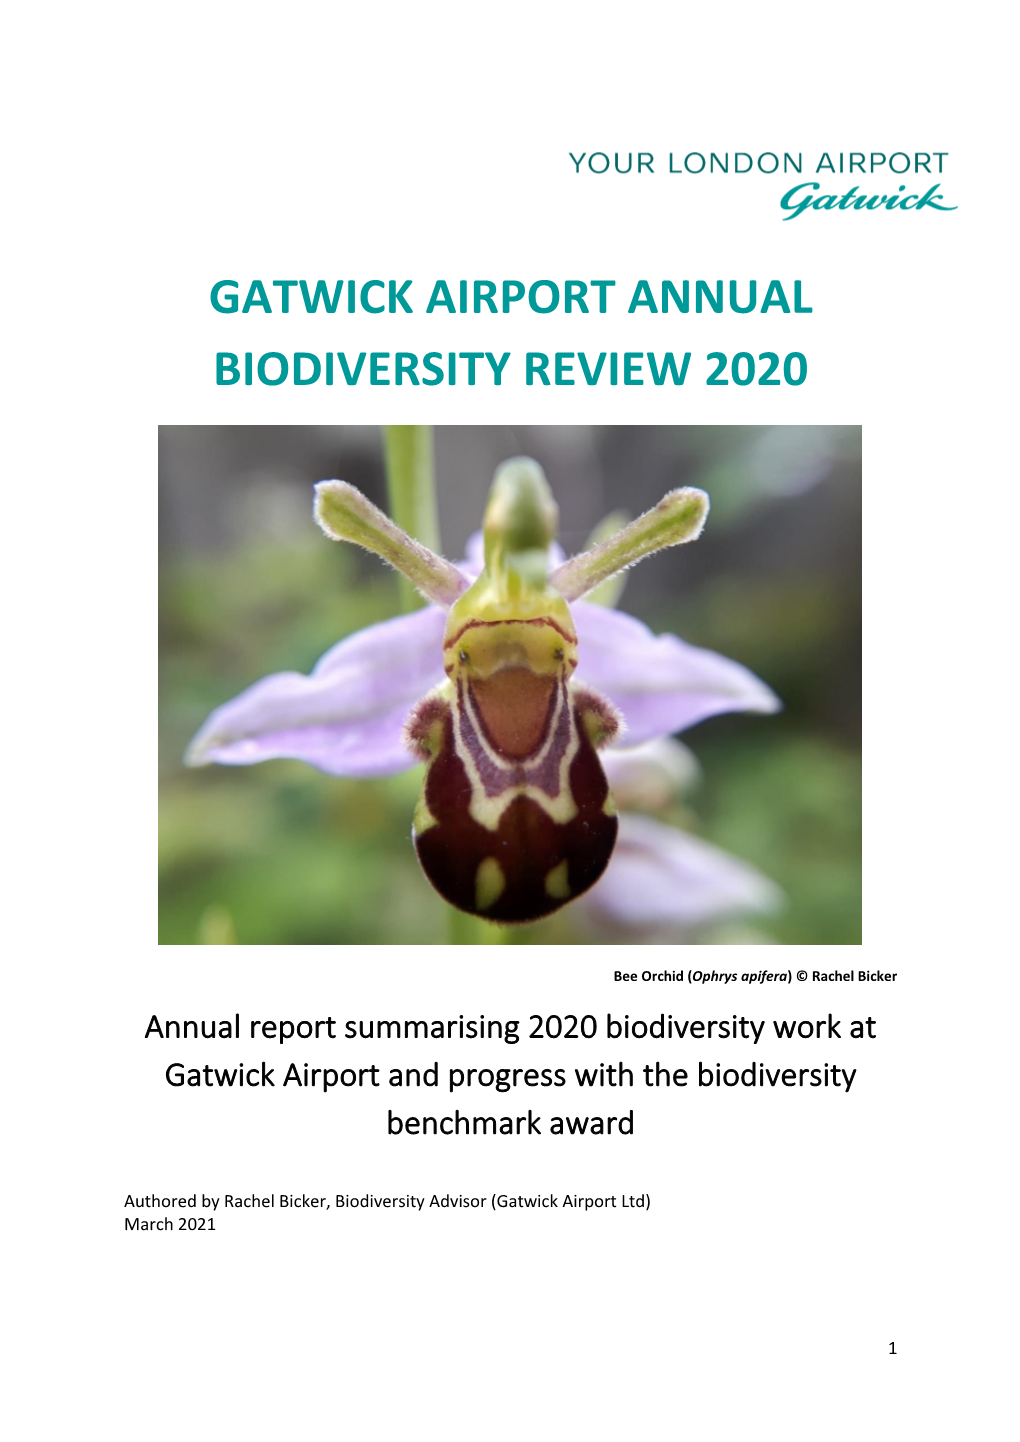 Gatwick Airport Annual Biodiversity Review 2020